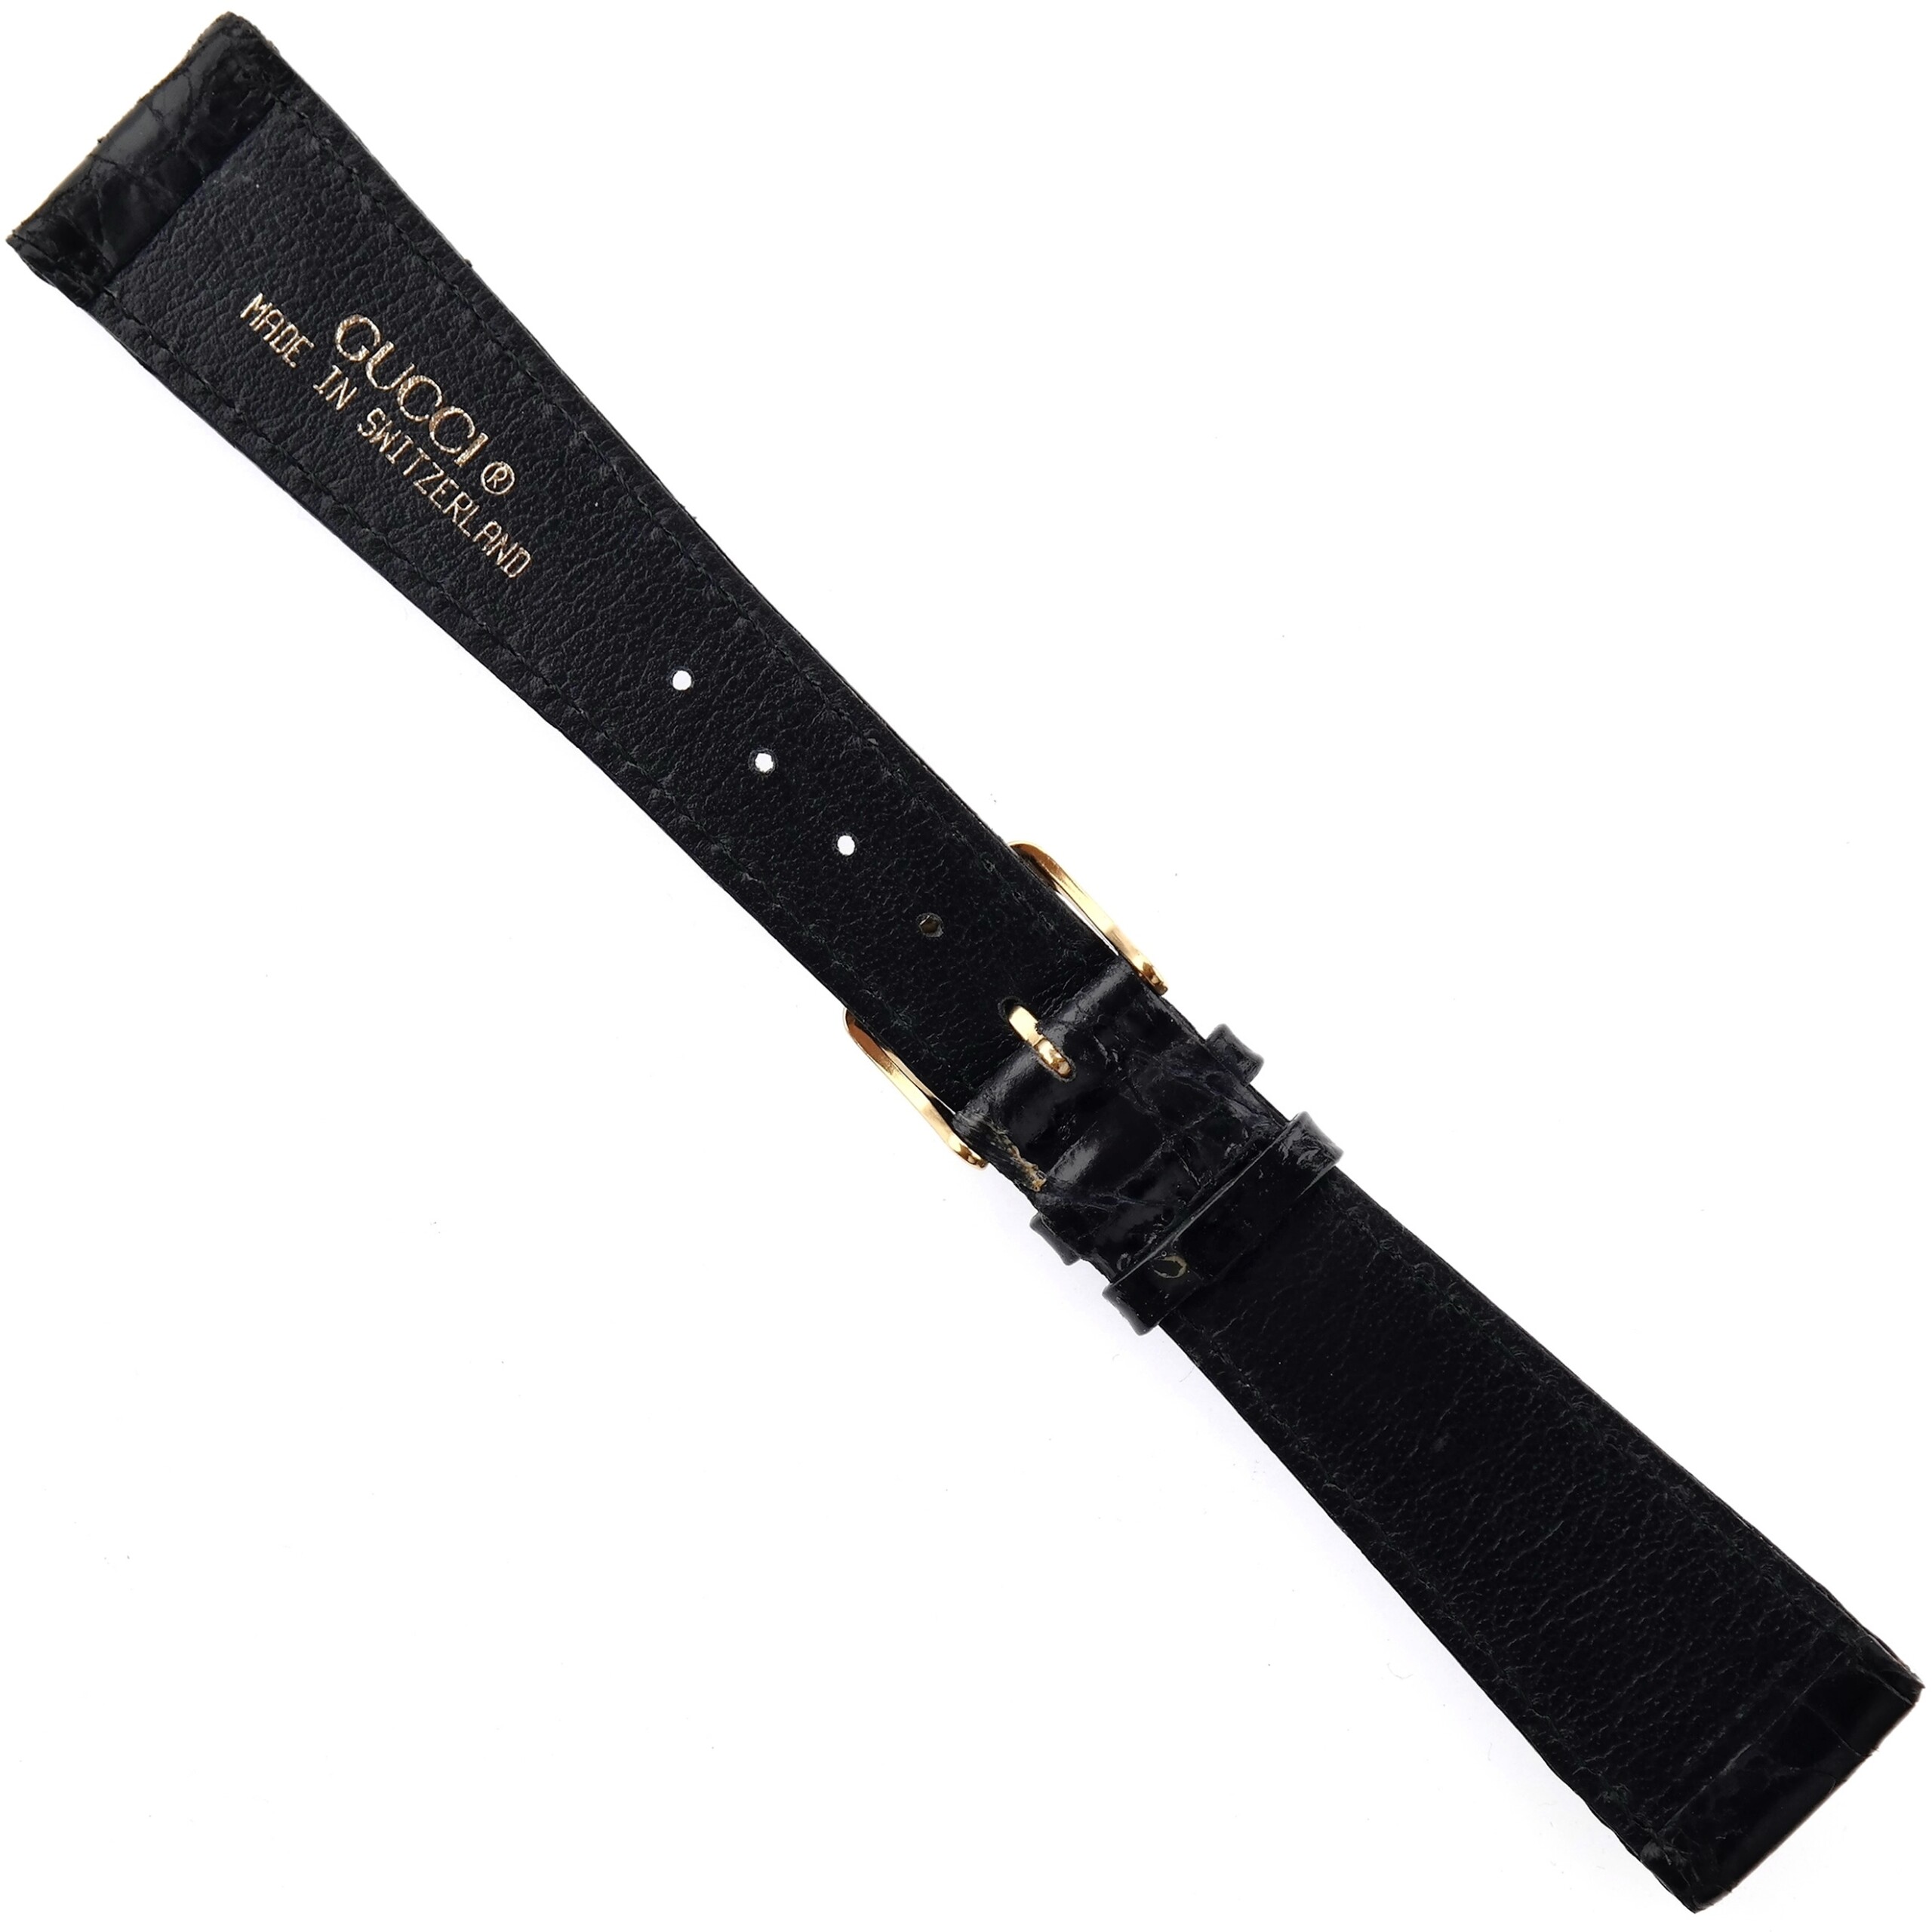 Authentic GUCCI Watch Strap - Lacquered Leather - 22 mm - Made in Switzerland